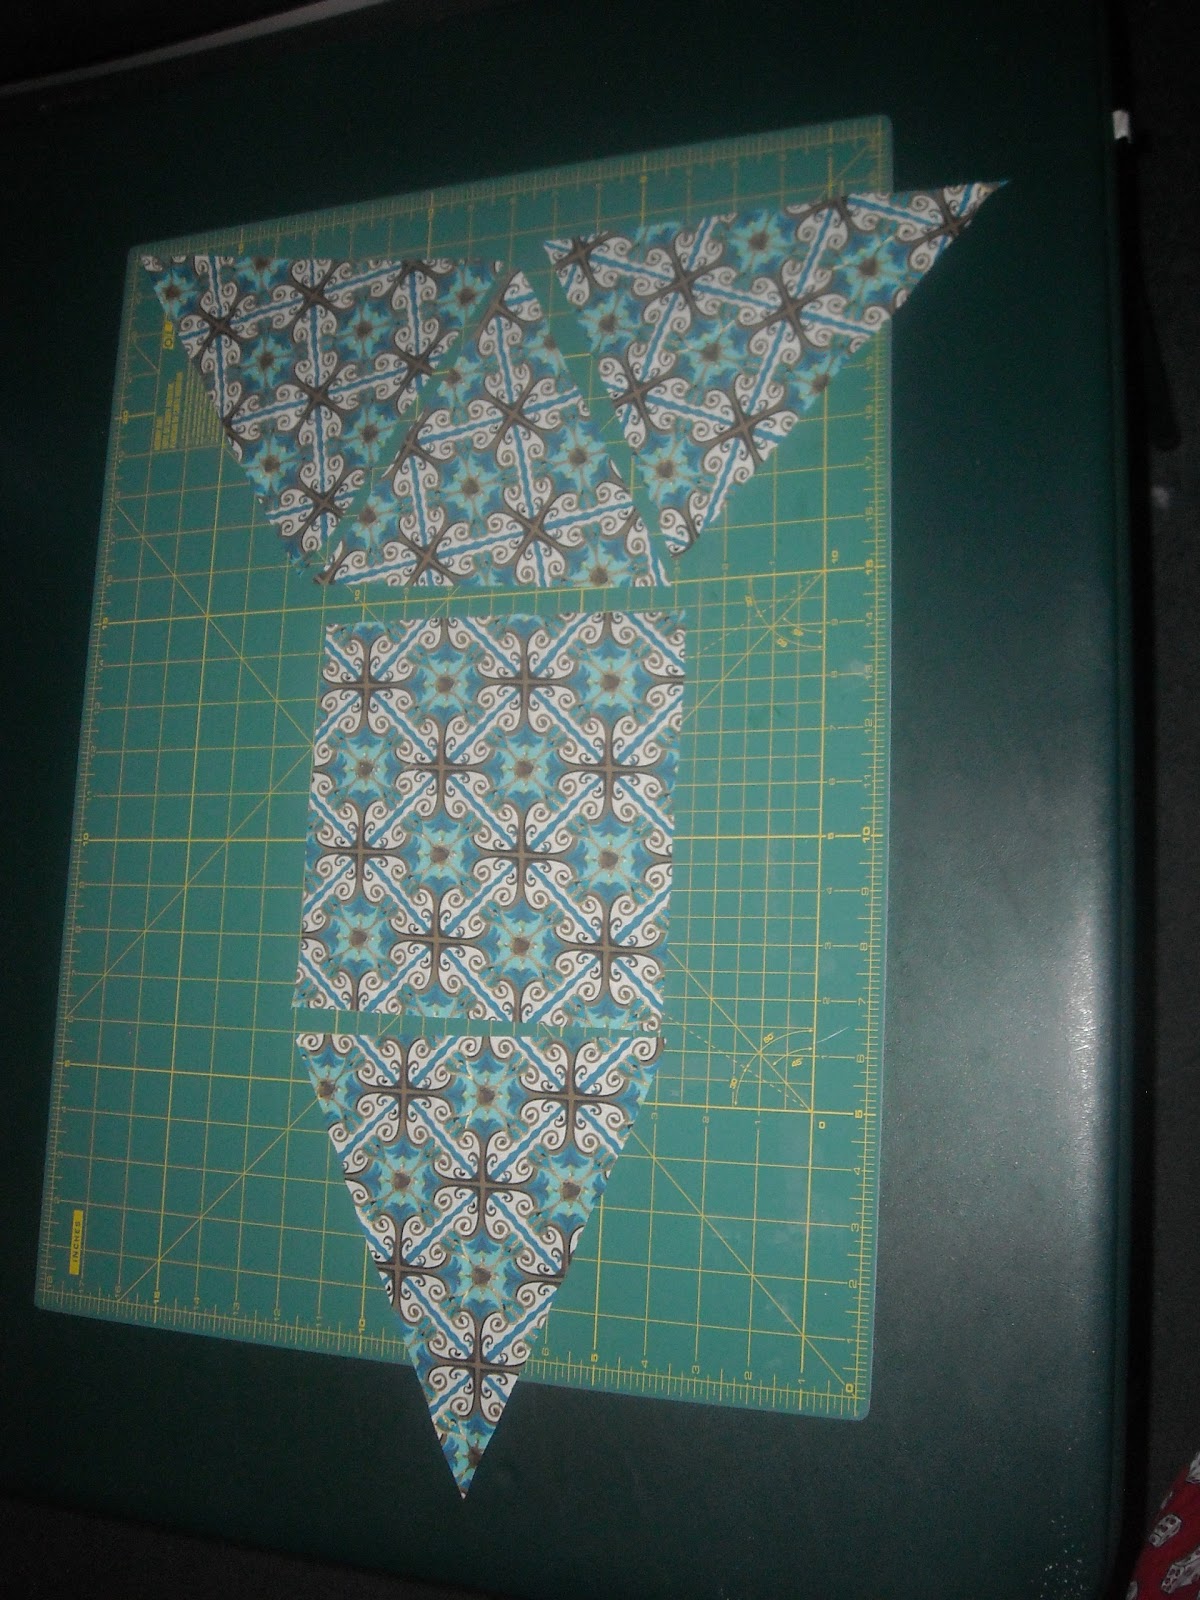 A Sewing Bloggery: iPad Pillow Tutorial1200 x 1600